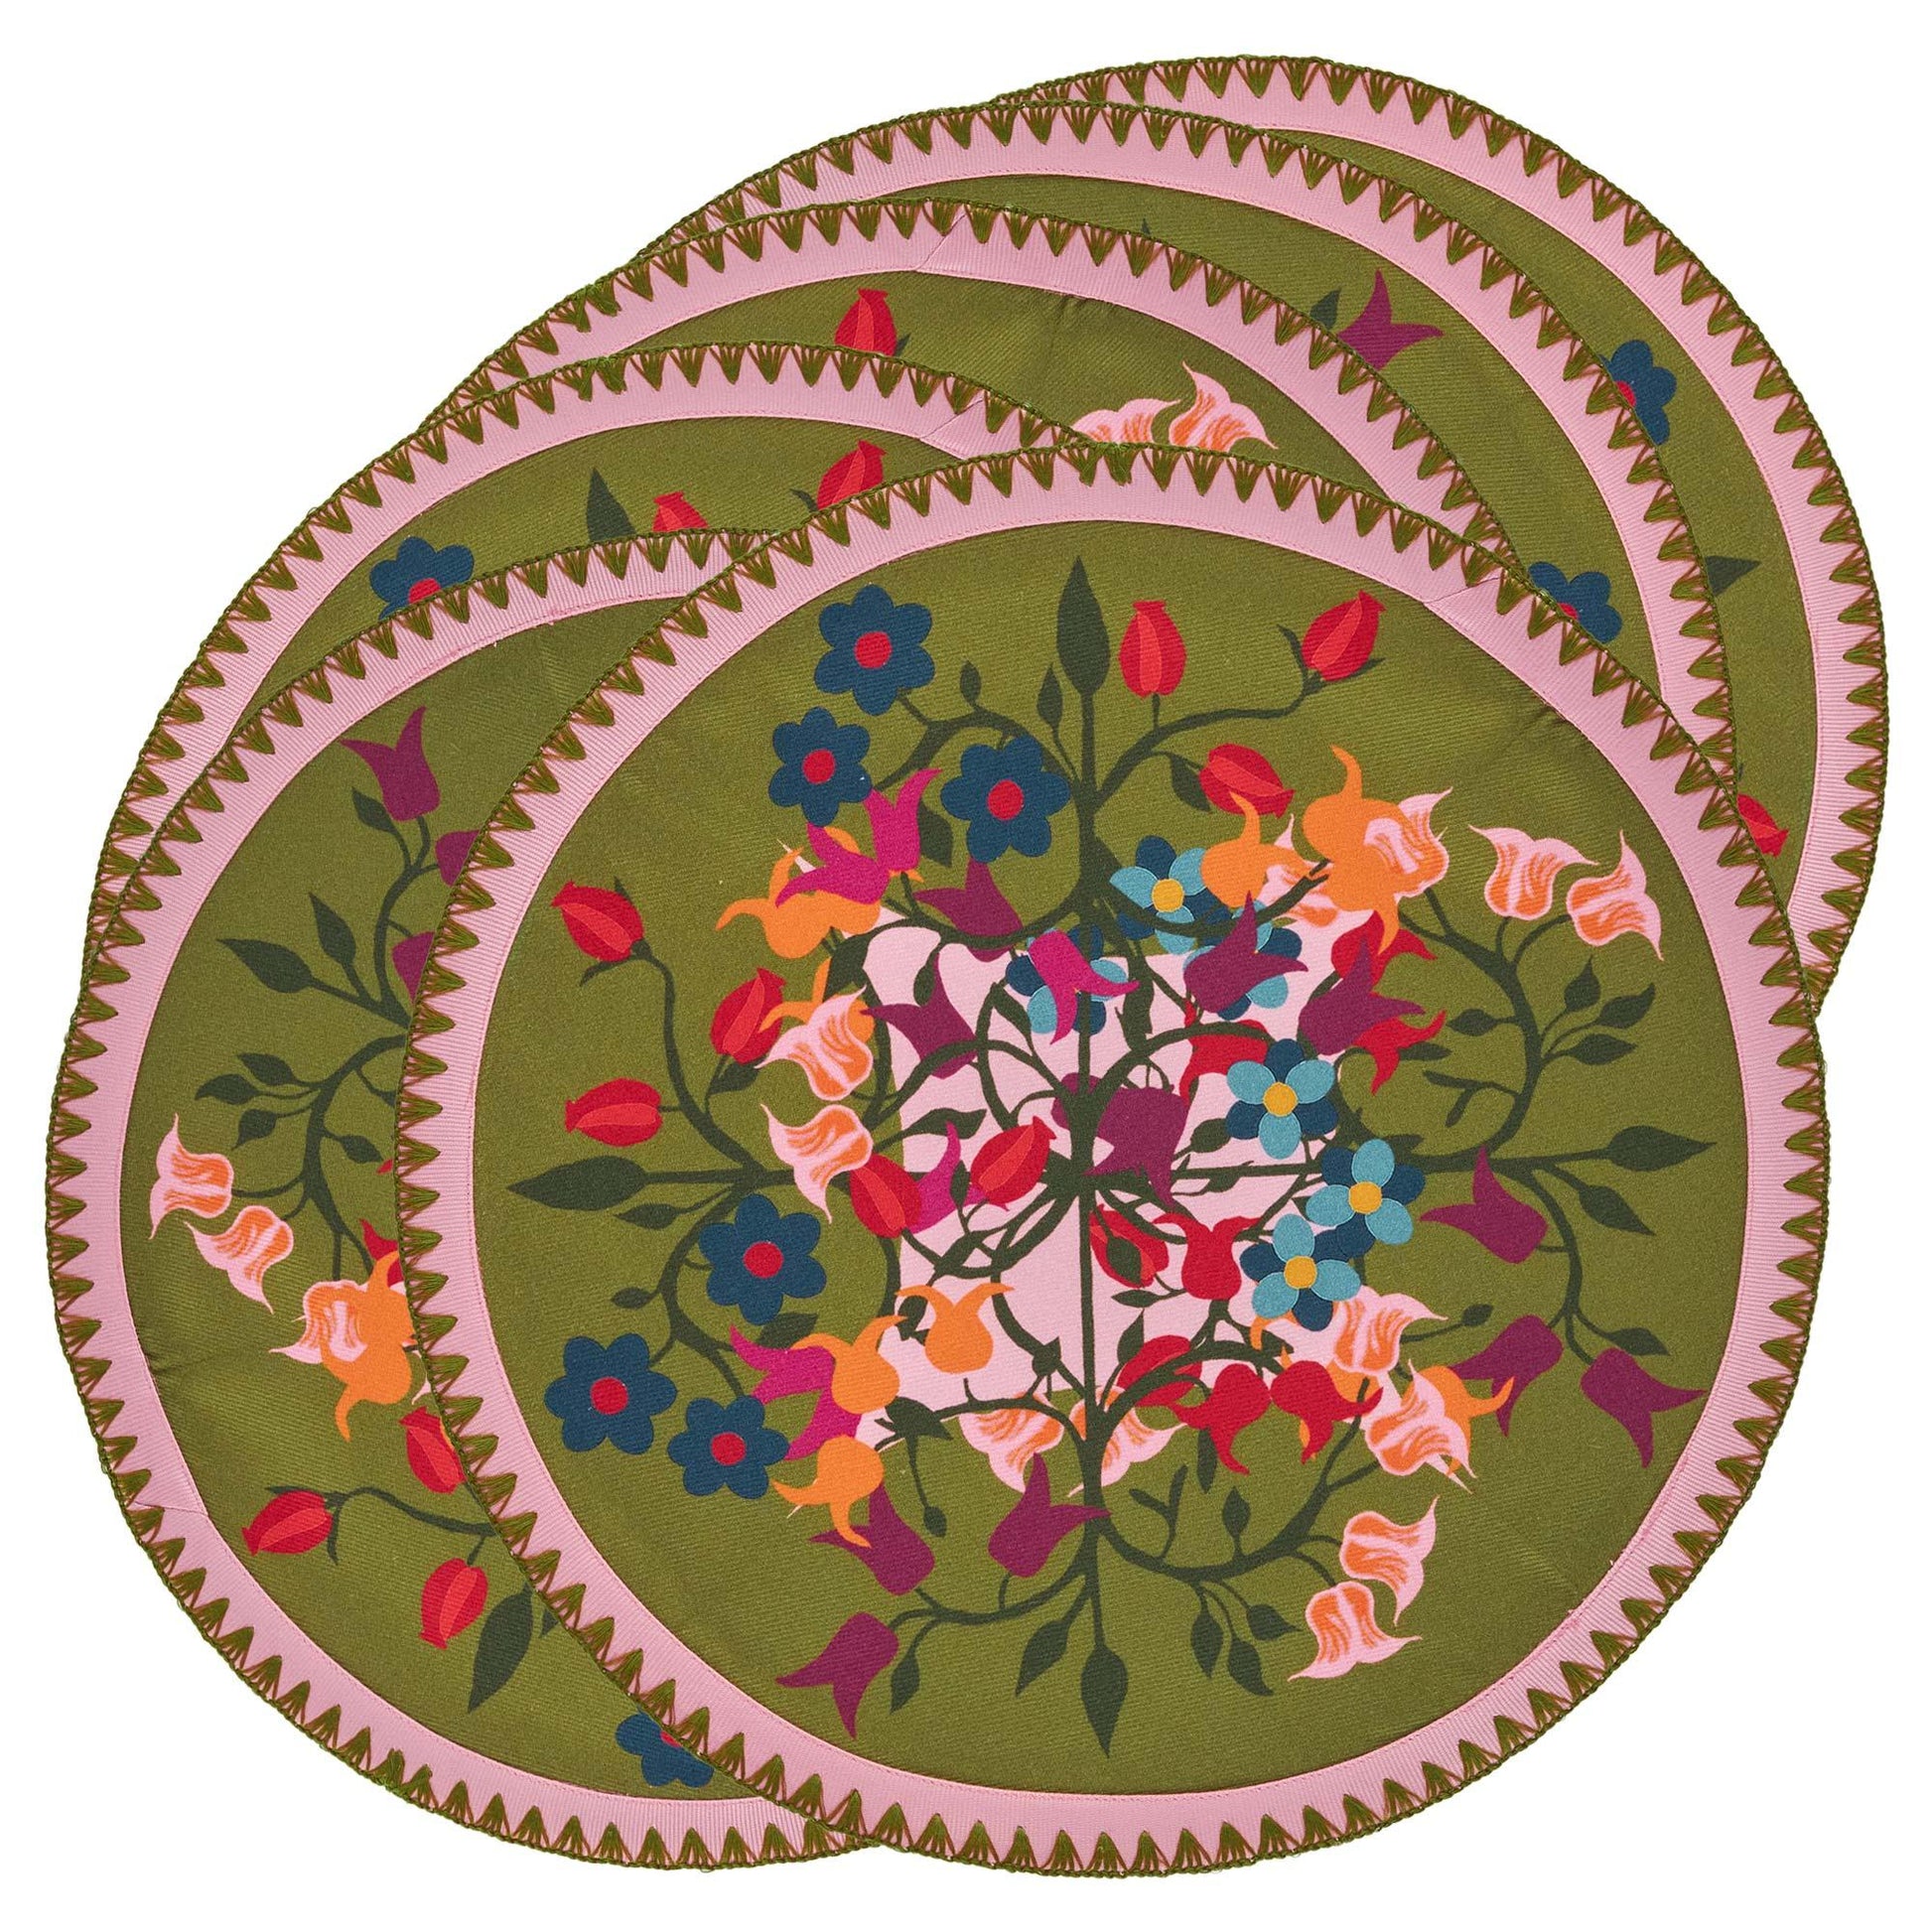 6 round placemats in green and pink floral motifs.